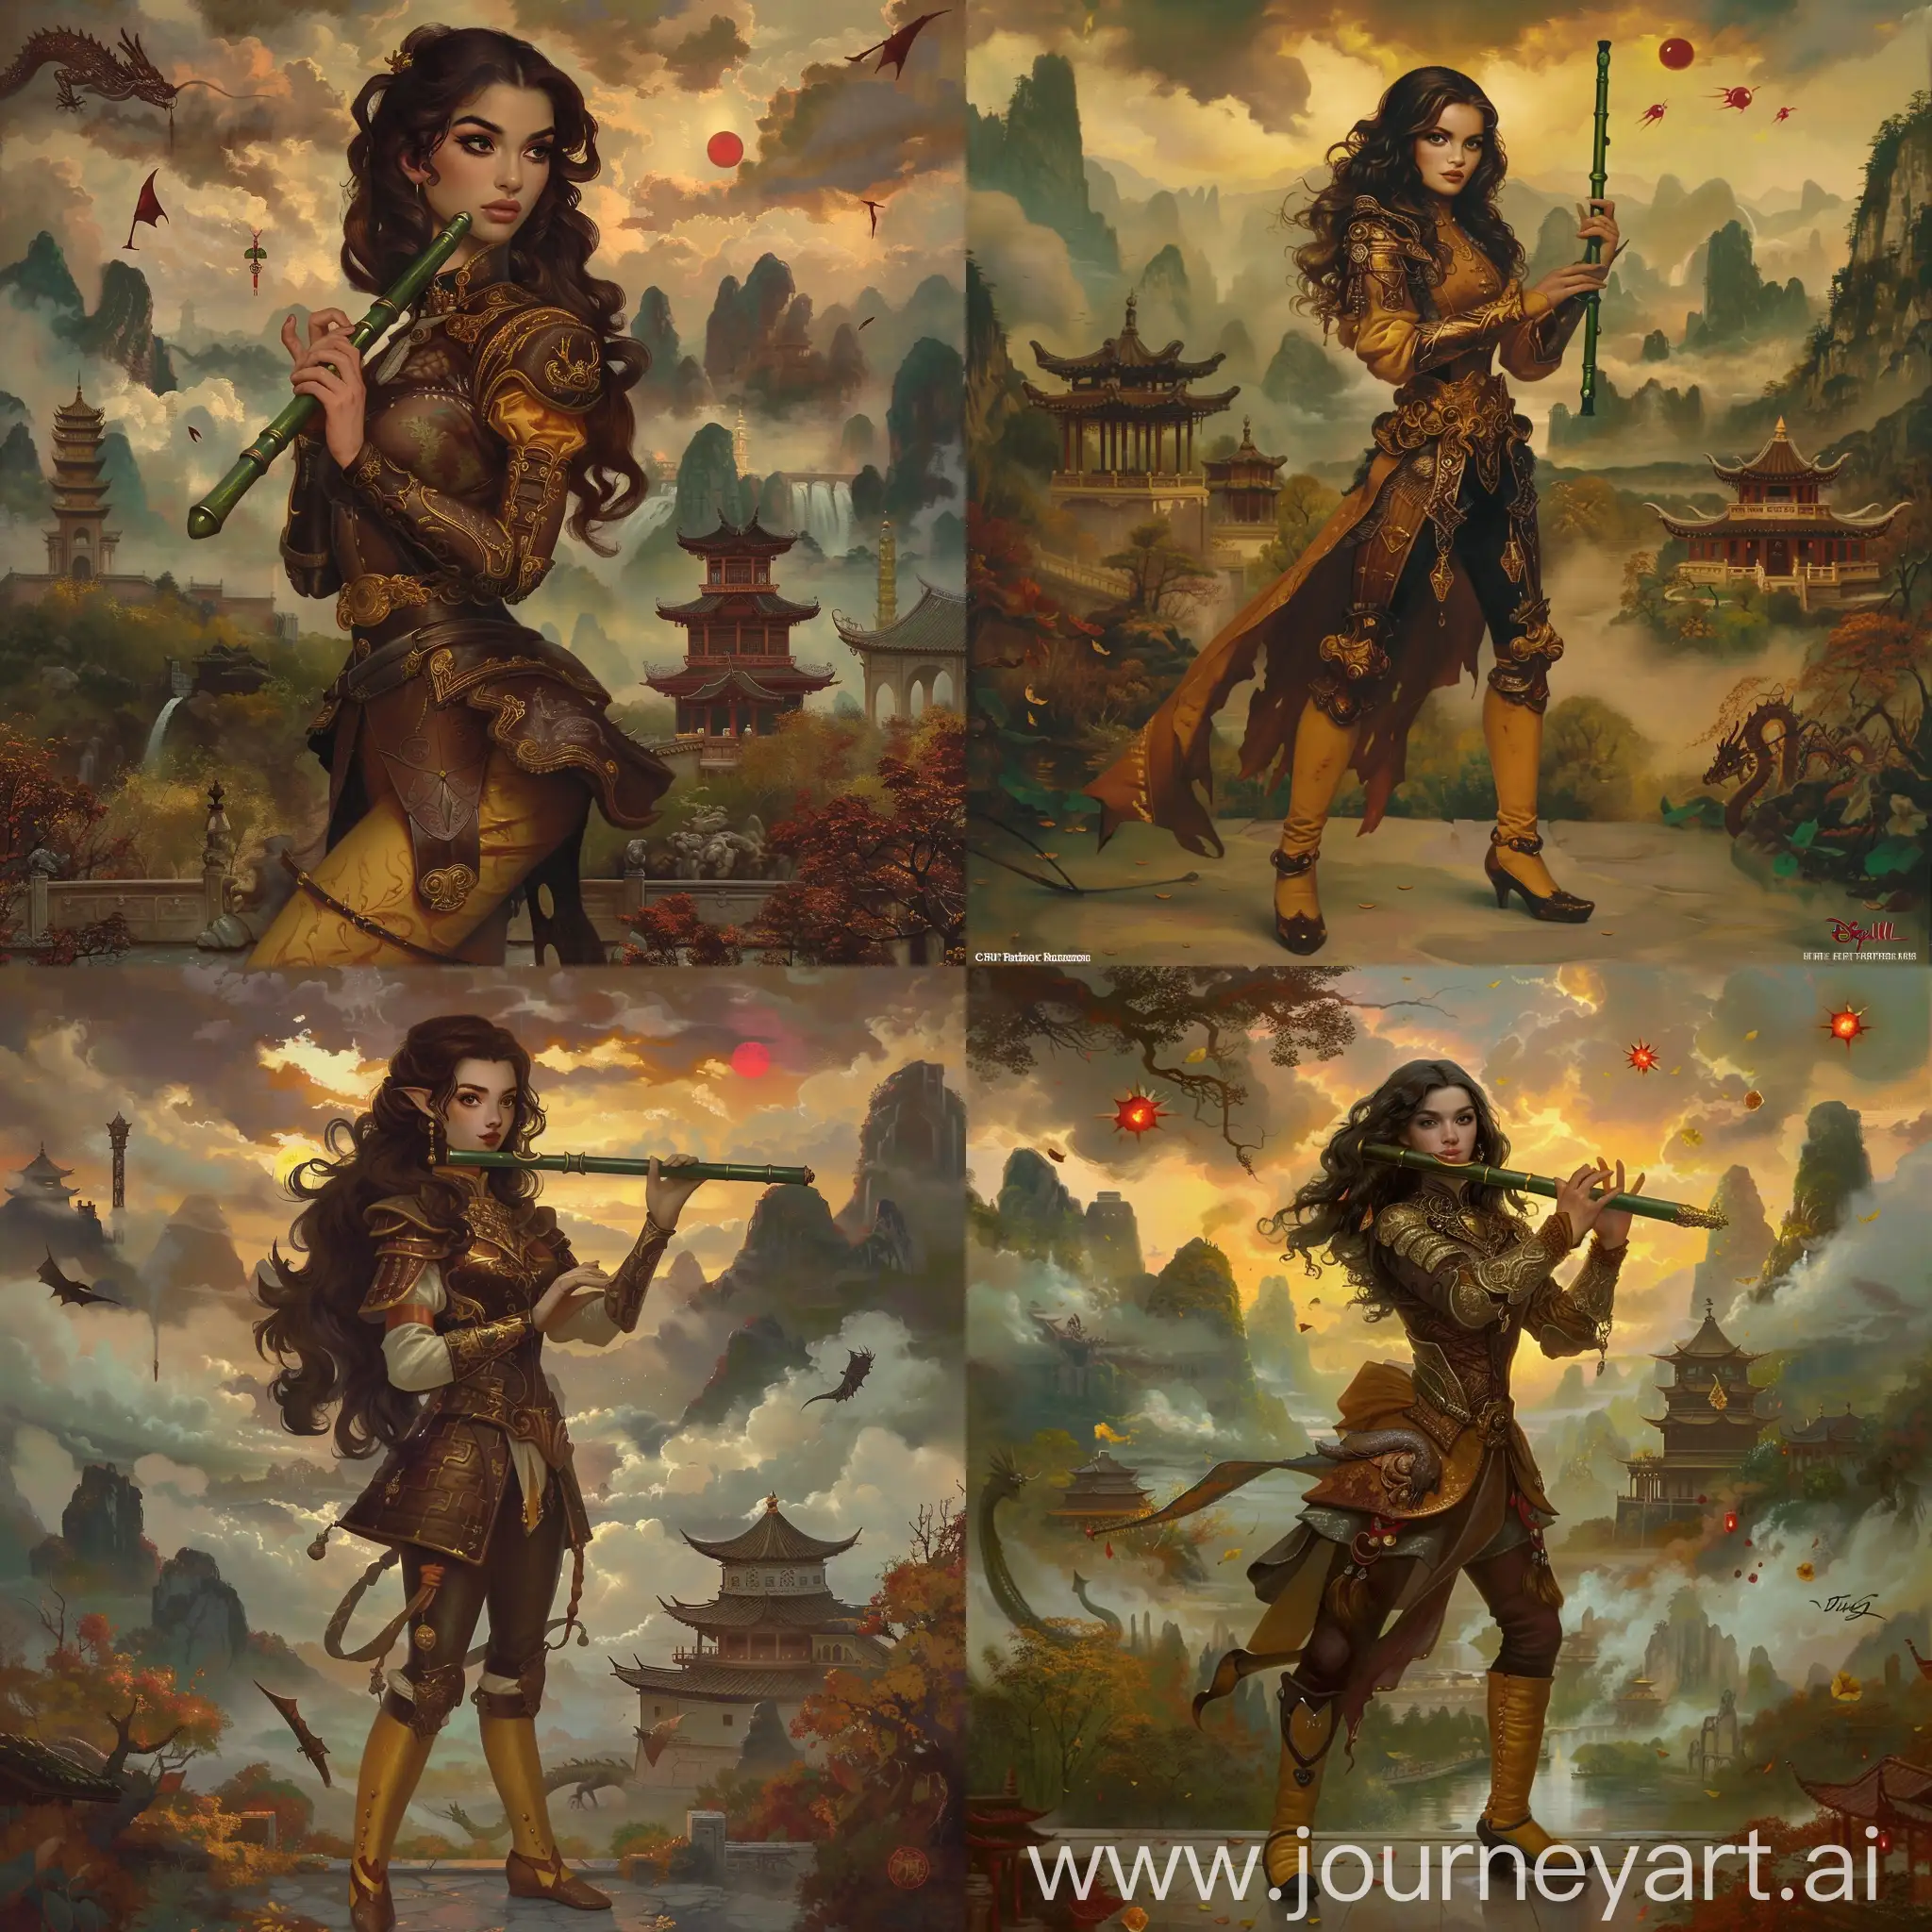 Dark-Disney-Villain-Drizella-Tremaine-in-Chinese-Armor-with-Flute